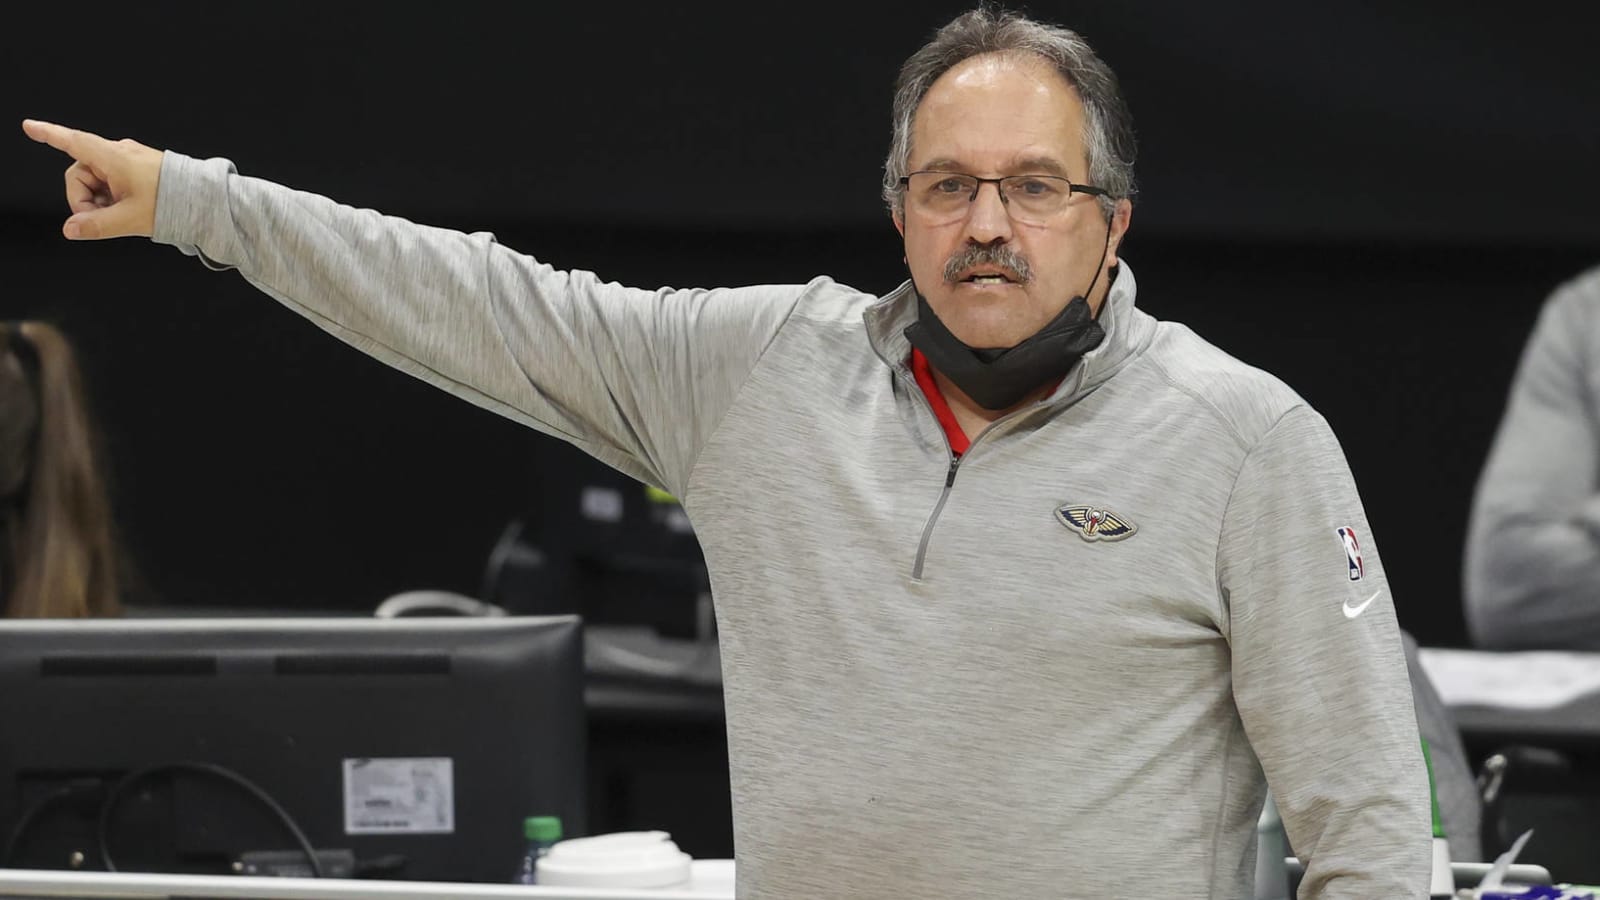 SVG returning to TV after being fired by Pelicans